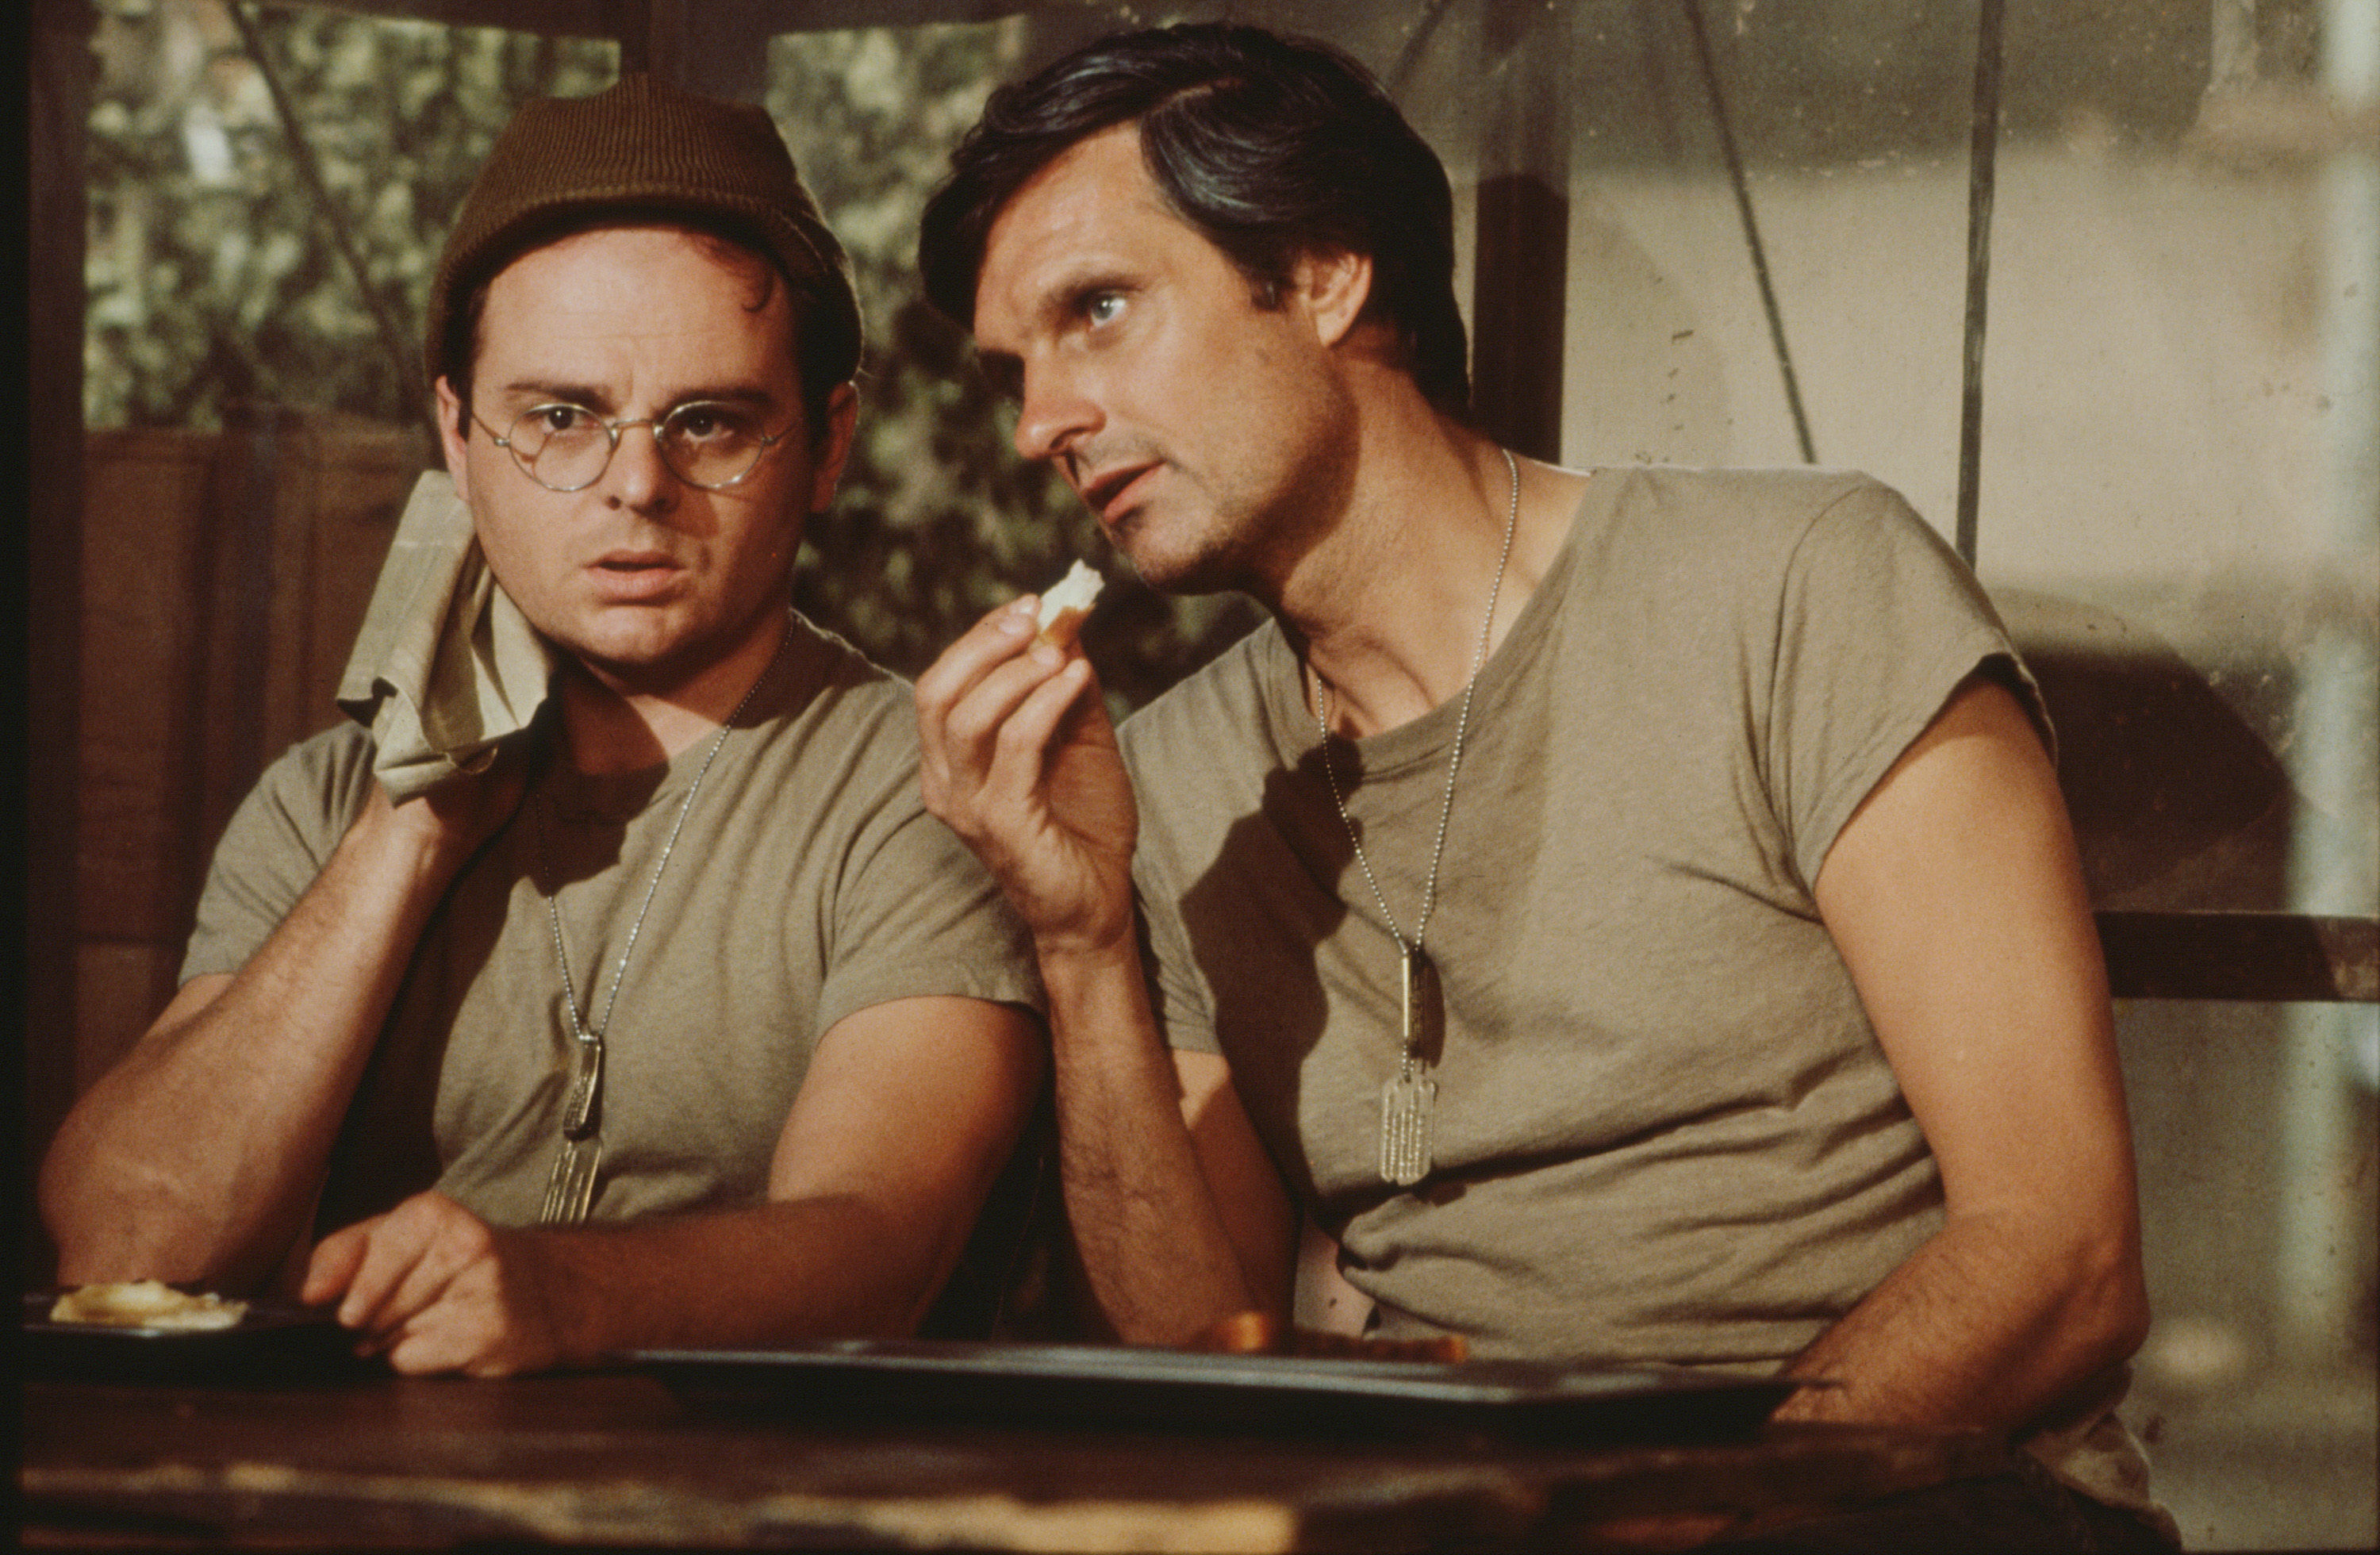 Alan Alda and Gary Burghoff on "M*A*S*H" in 1976 | Source: Getty Images